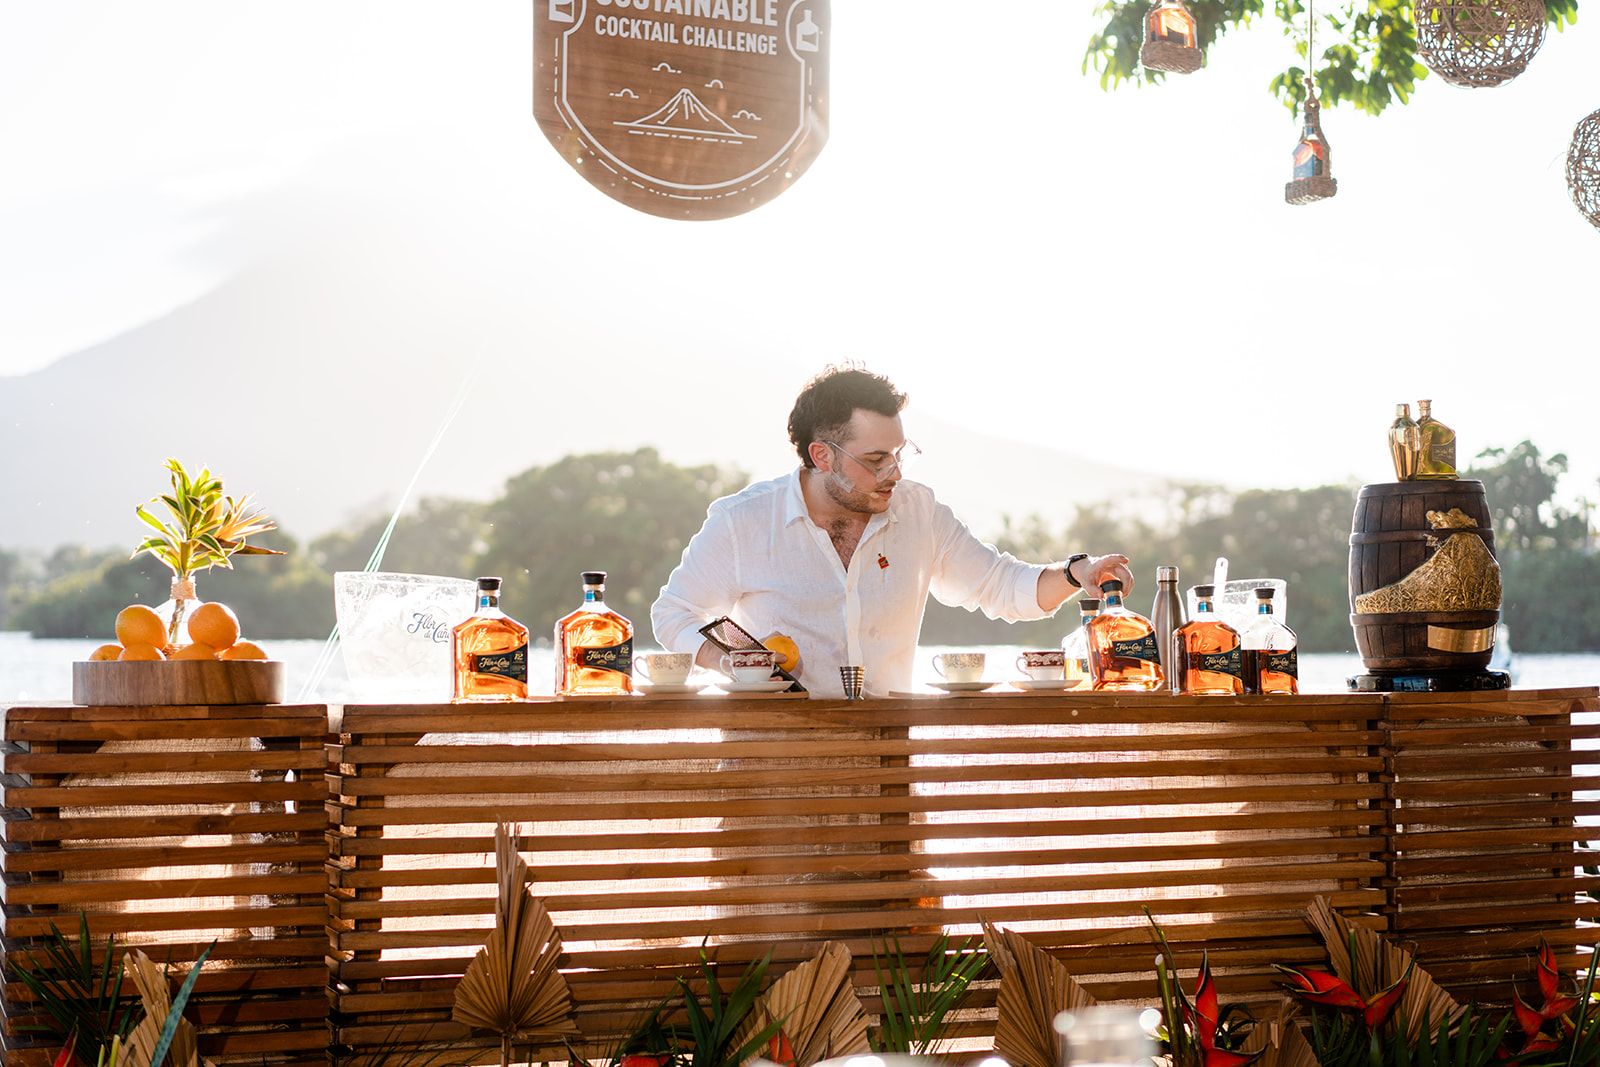 Australian bartender Tom McHugh competes in the global final of the Flor de Caña Sustainable Cocktail Challenge earlier this year. Photo: Supplied